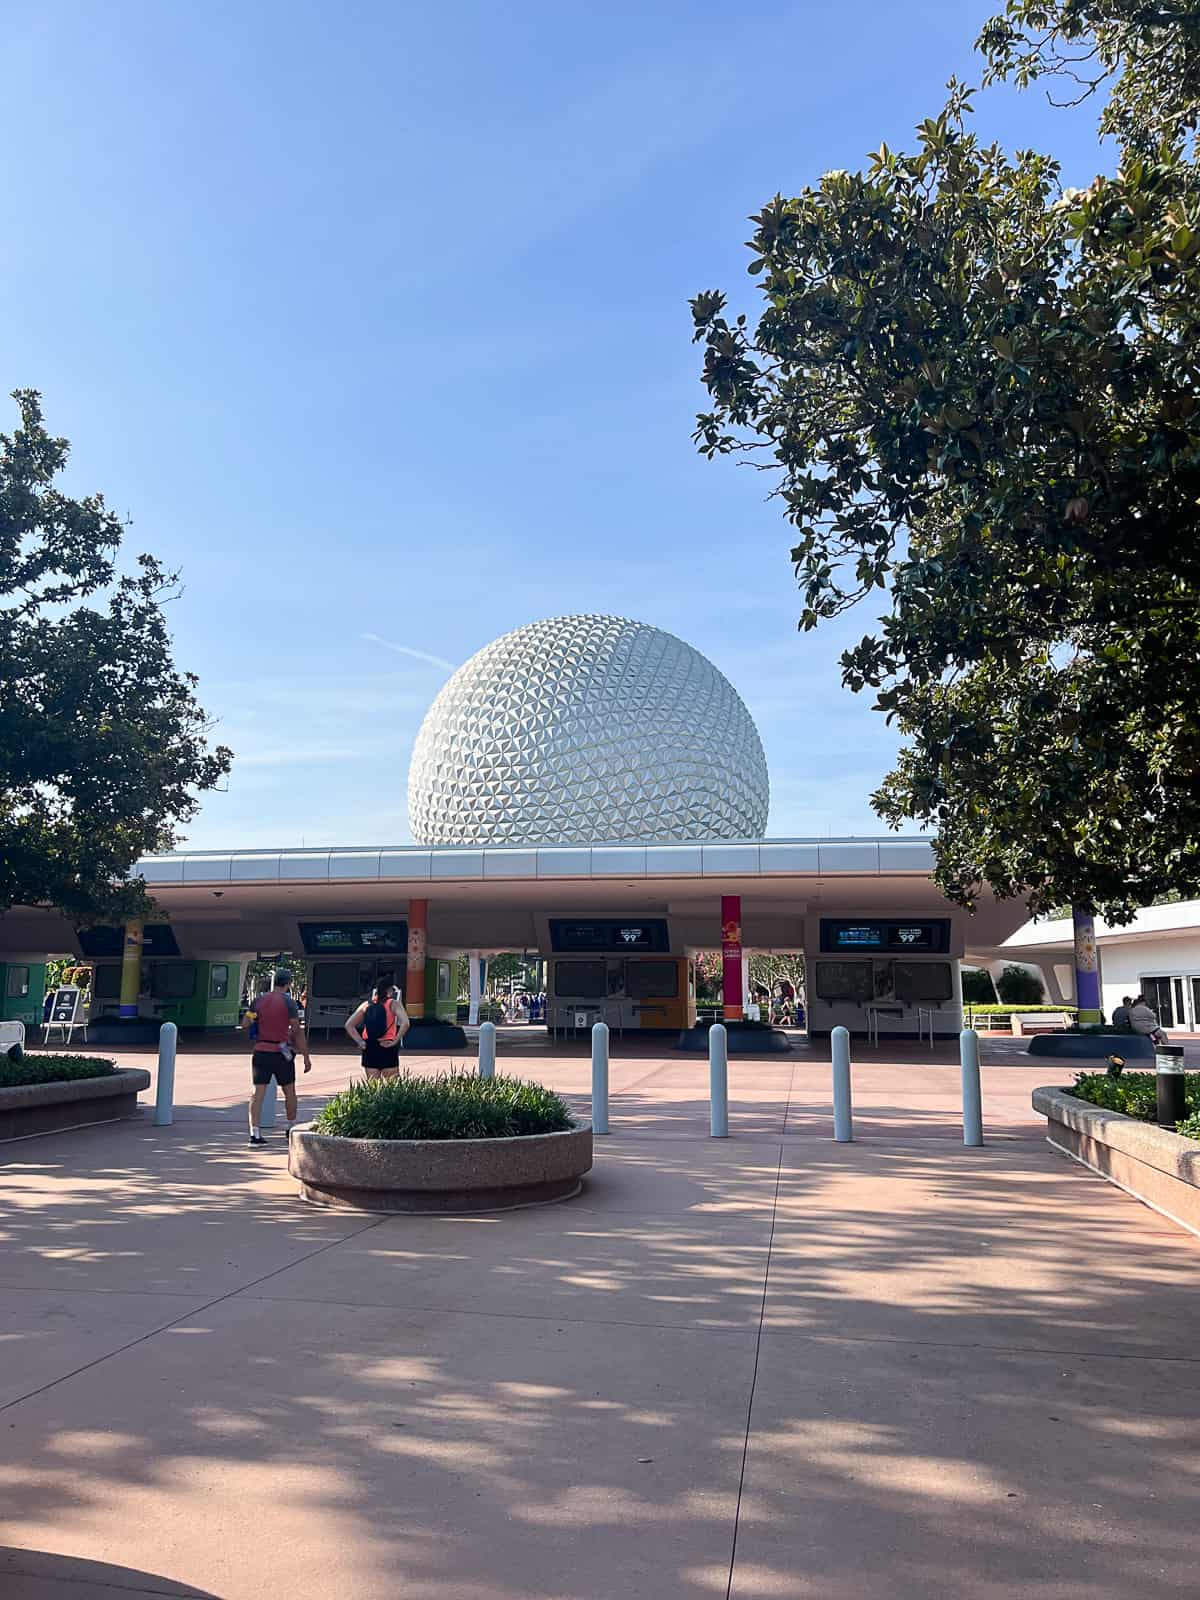 View of a Hot Day at Disney World Epcot Park